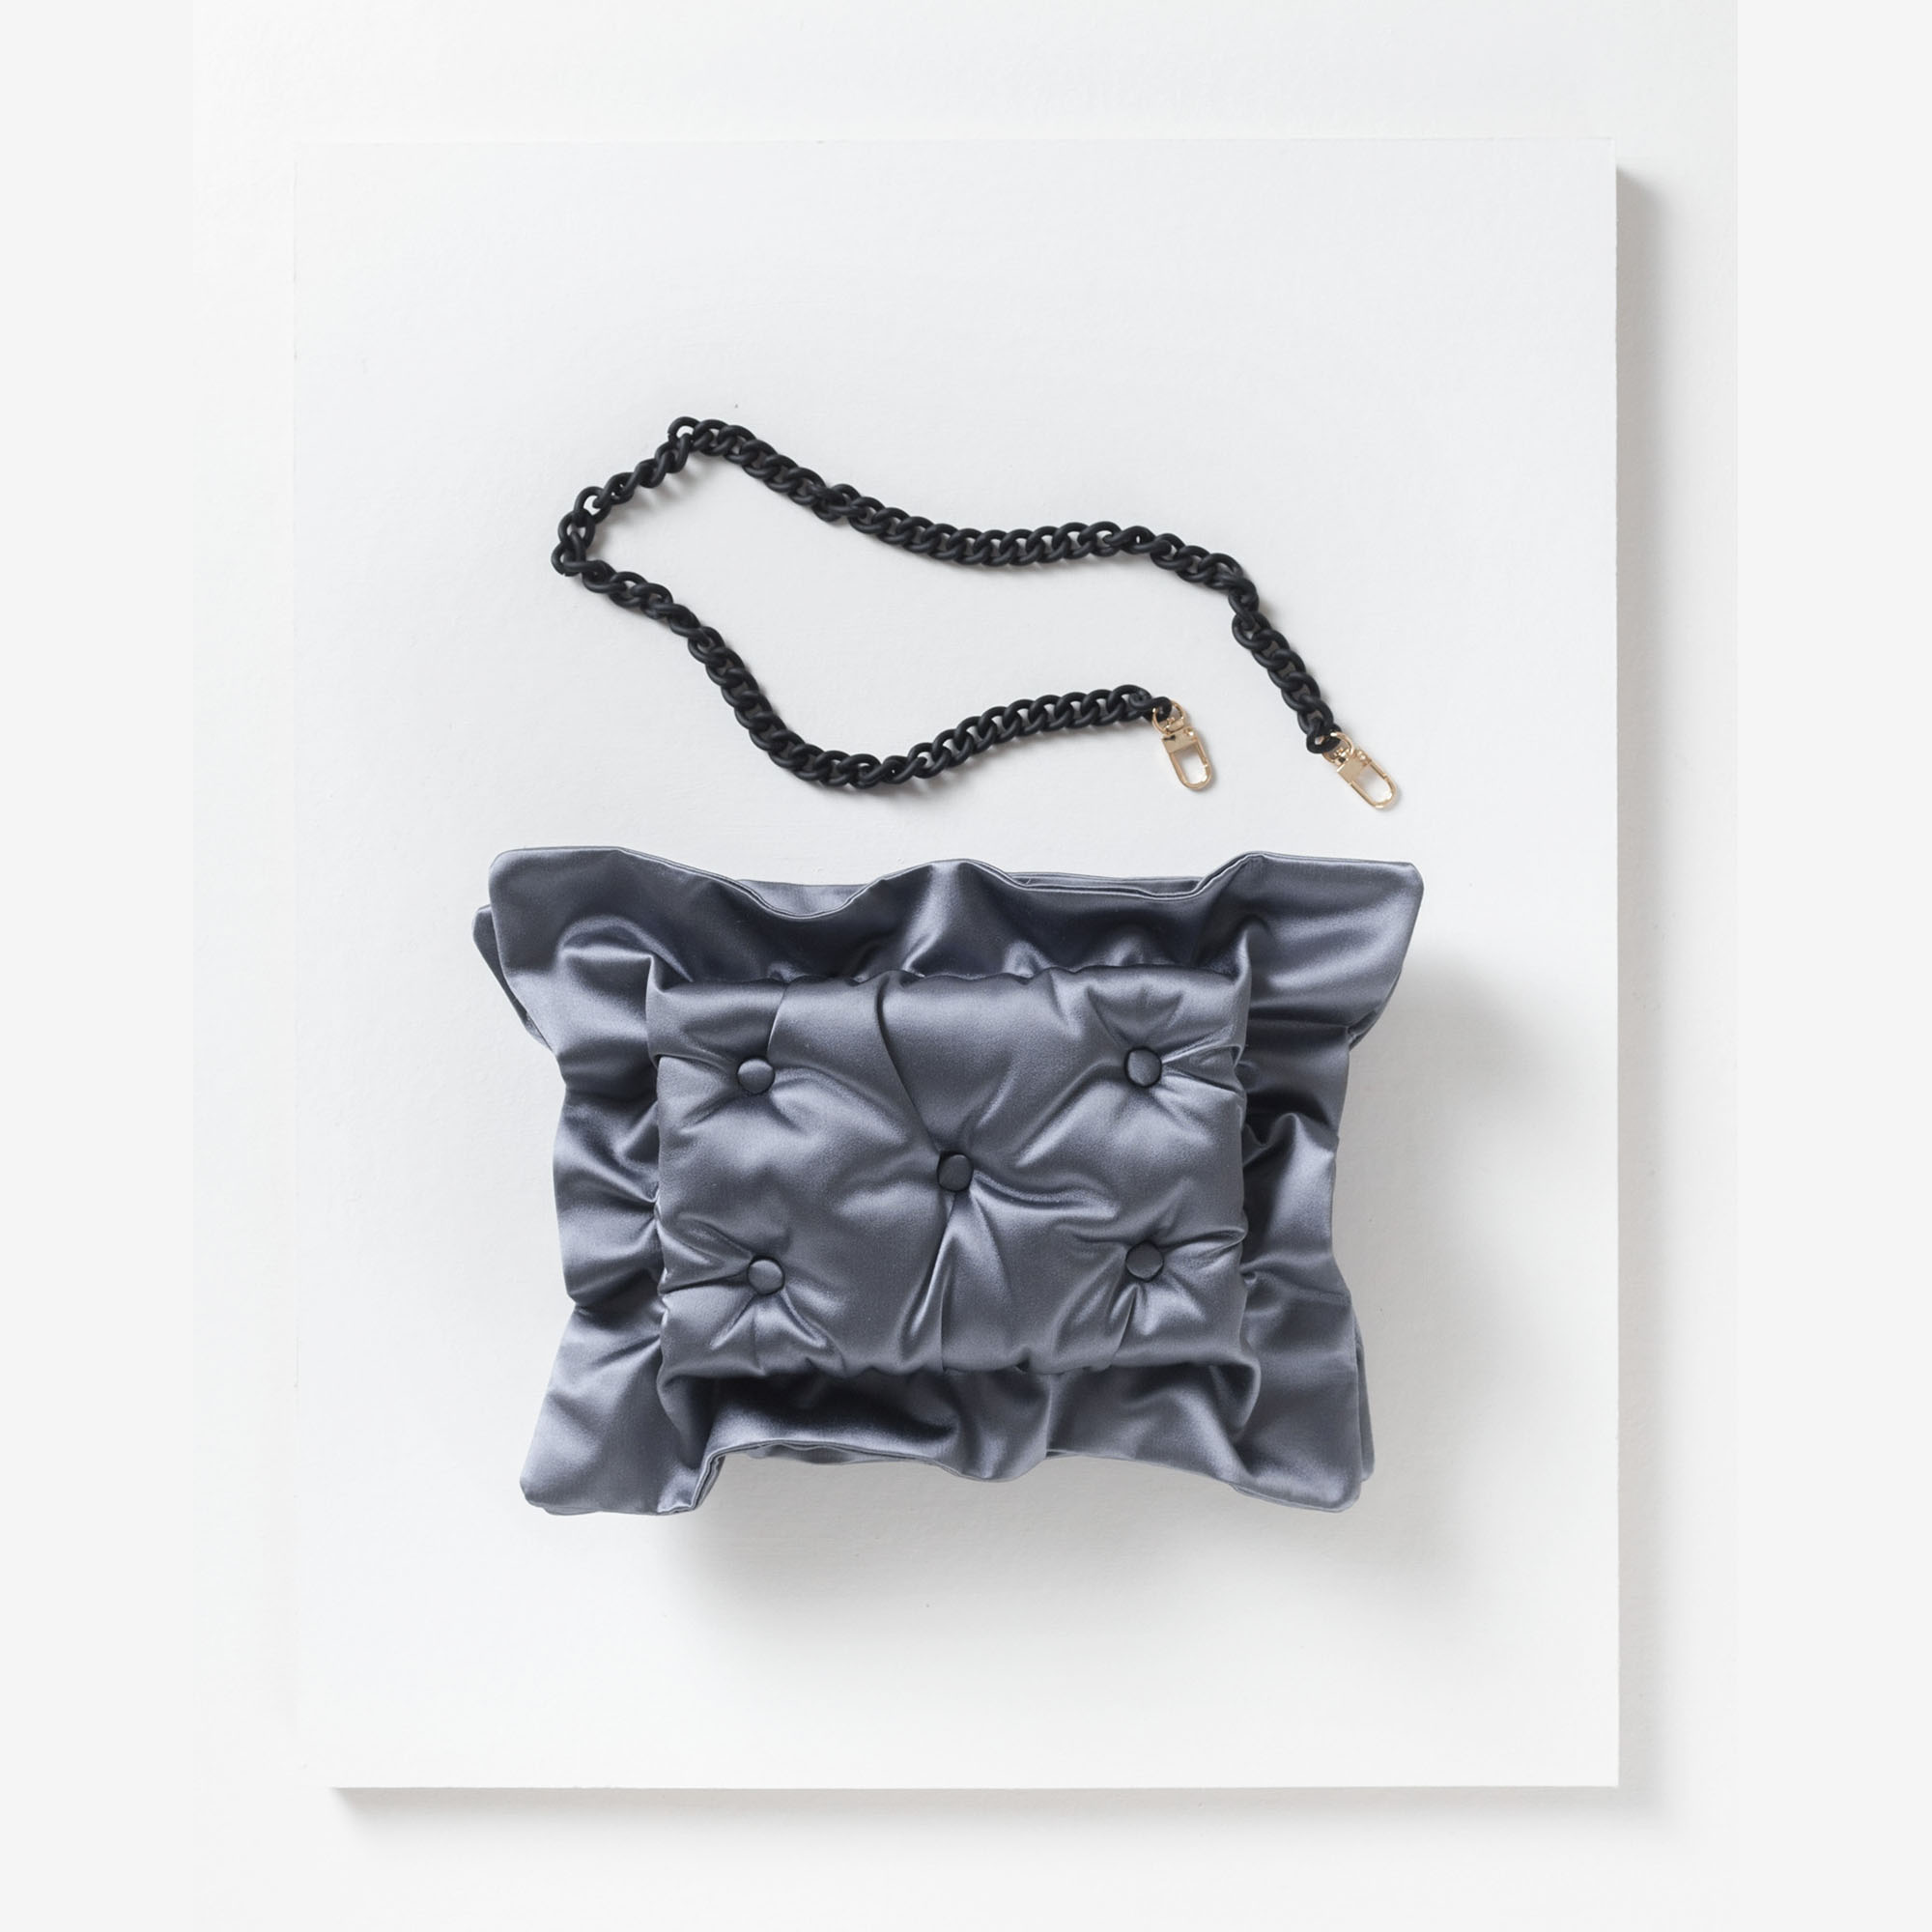 Laimushka dark grey quilted silk pillow bag with chain strap